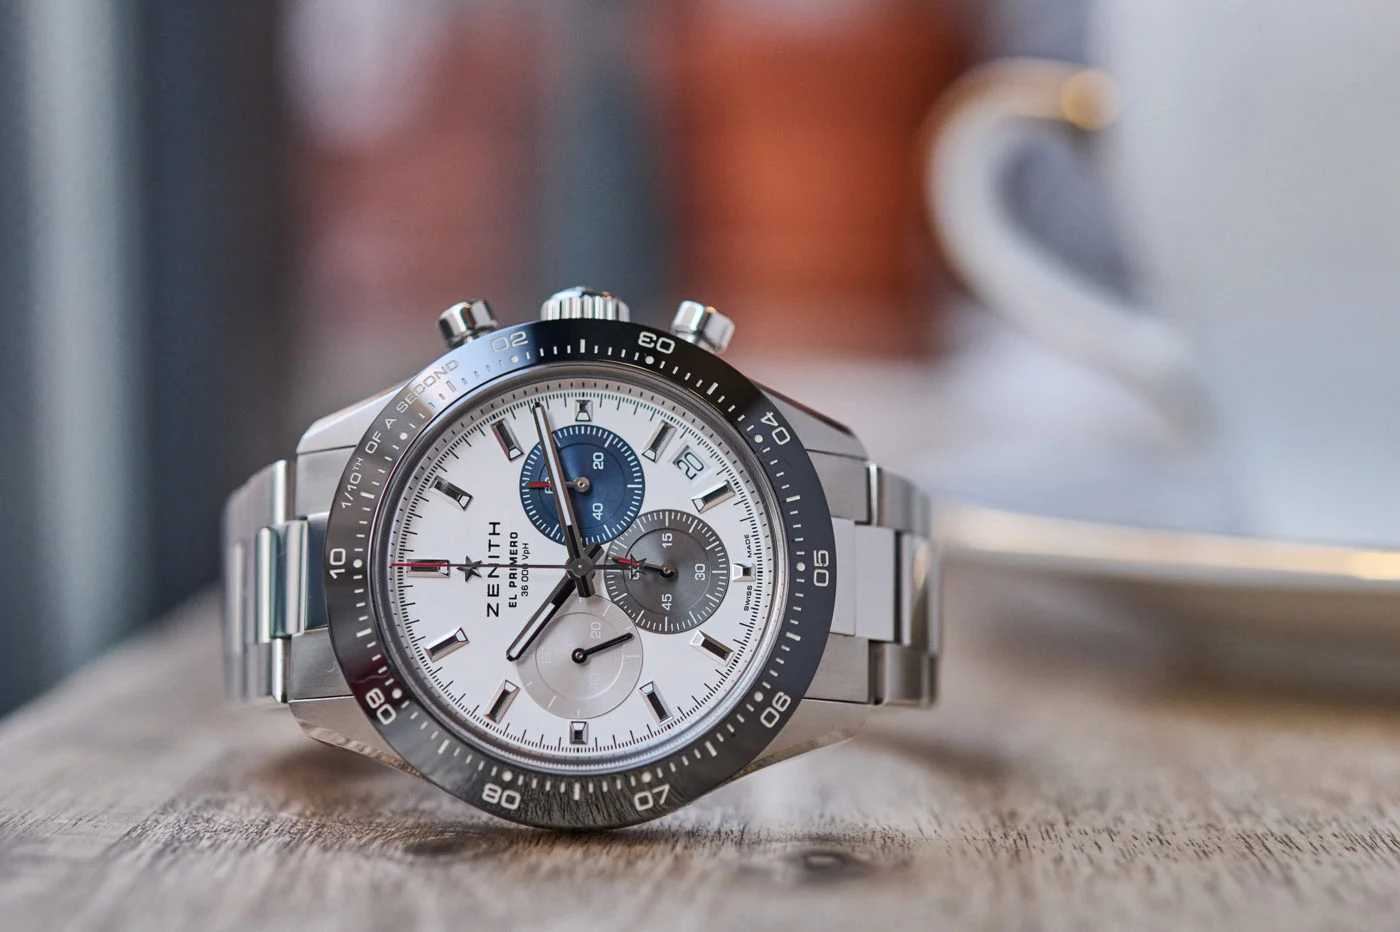 Learn All About The Zenith Chronomastes Watches Features And More